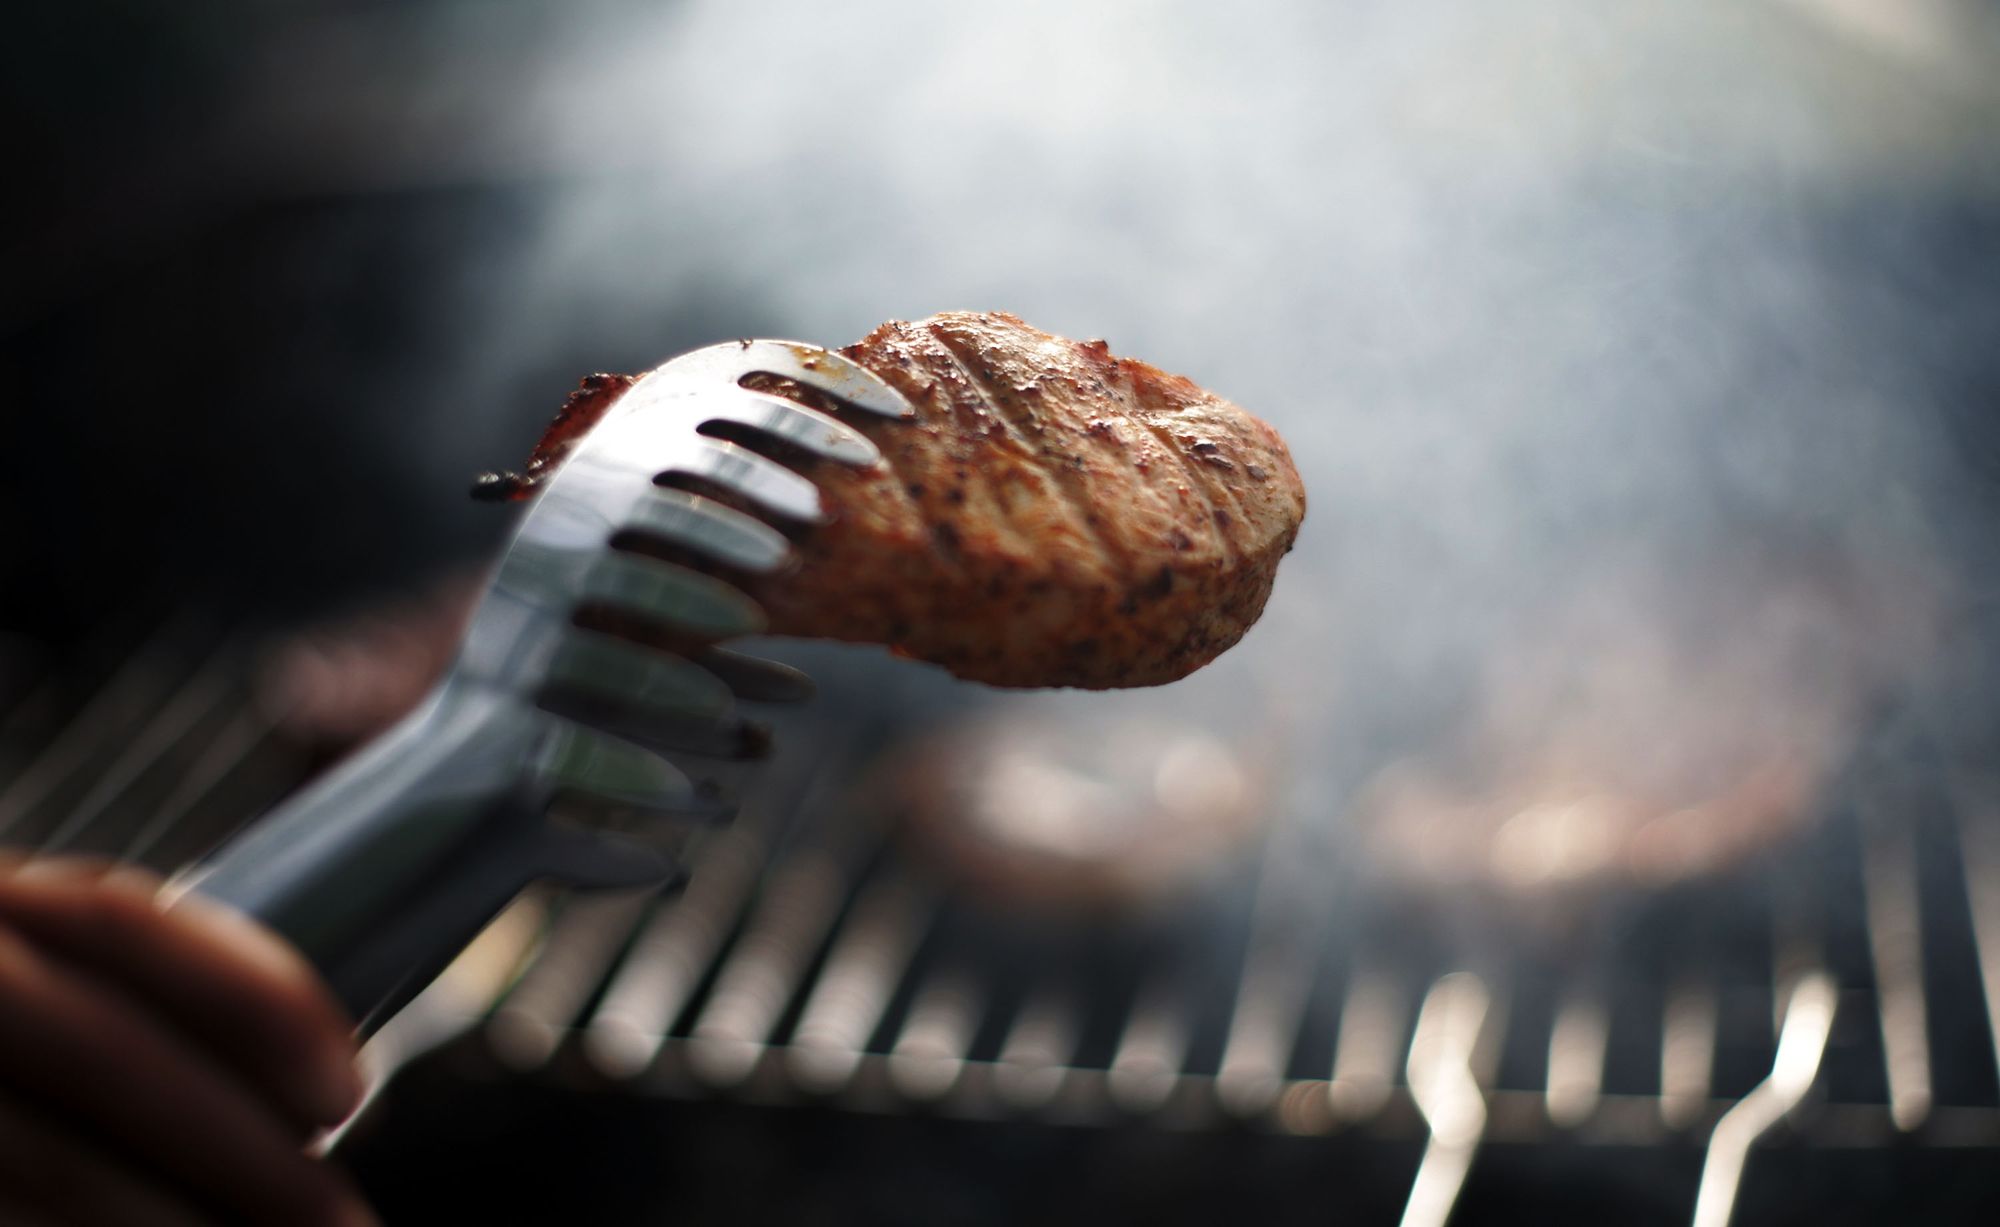 5 Easy Grilling Recipes For The Perfect Summer Backyard BBQ